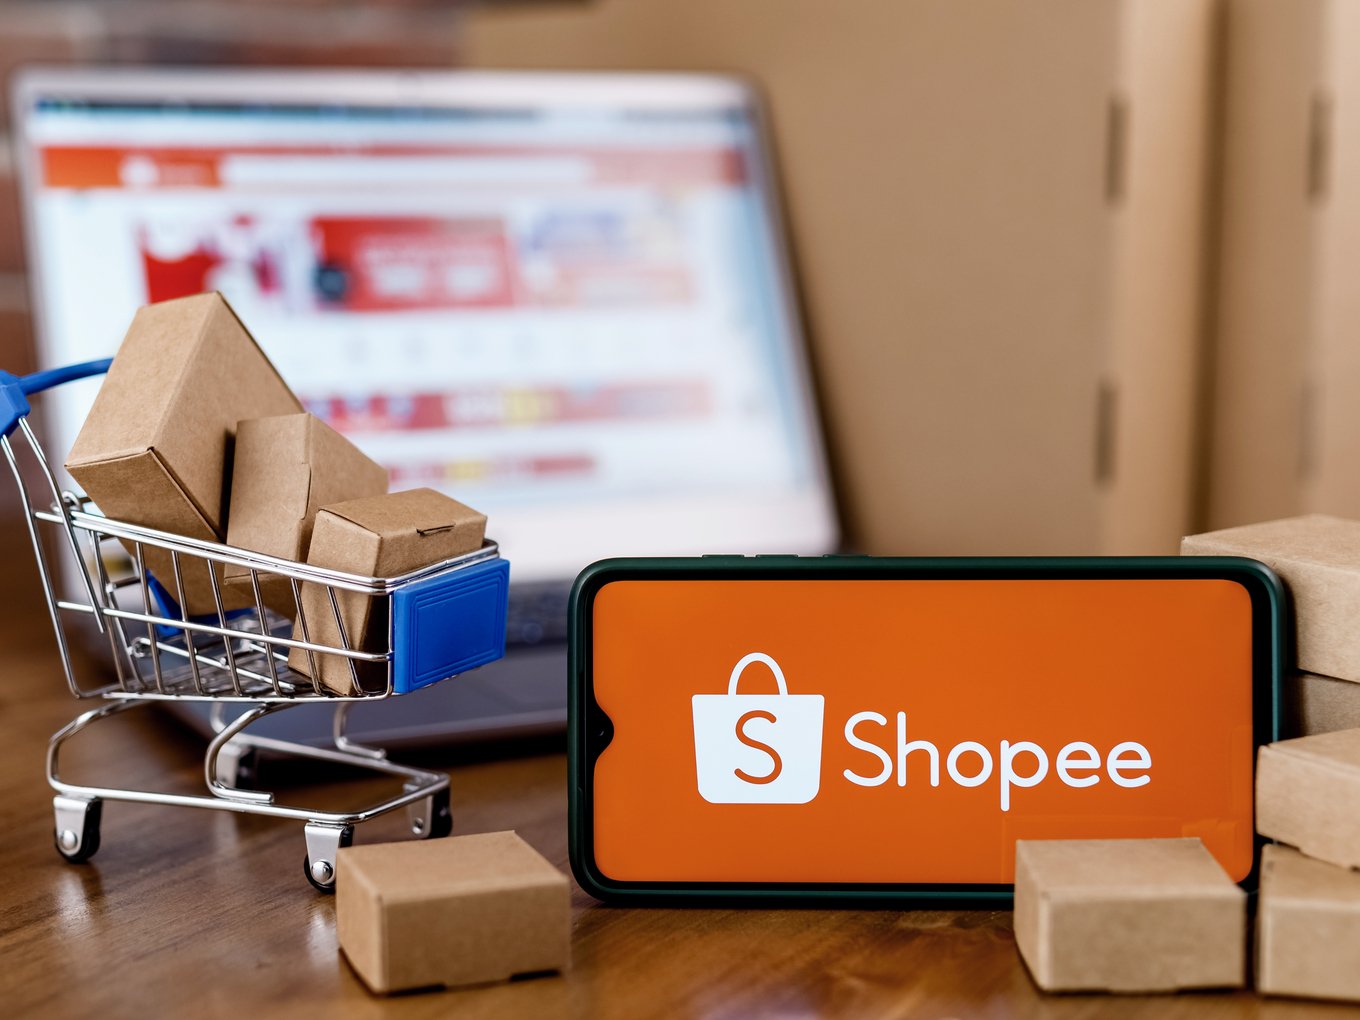 Singapore’s Ecommerce Giant Shopee Shuts Down India Operations